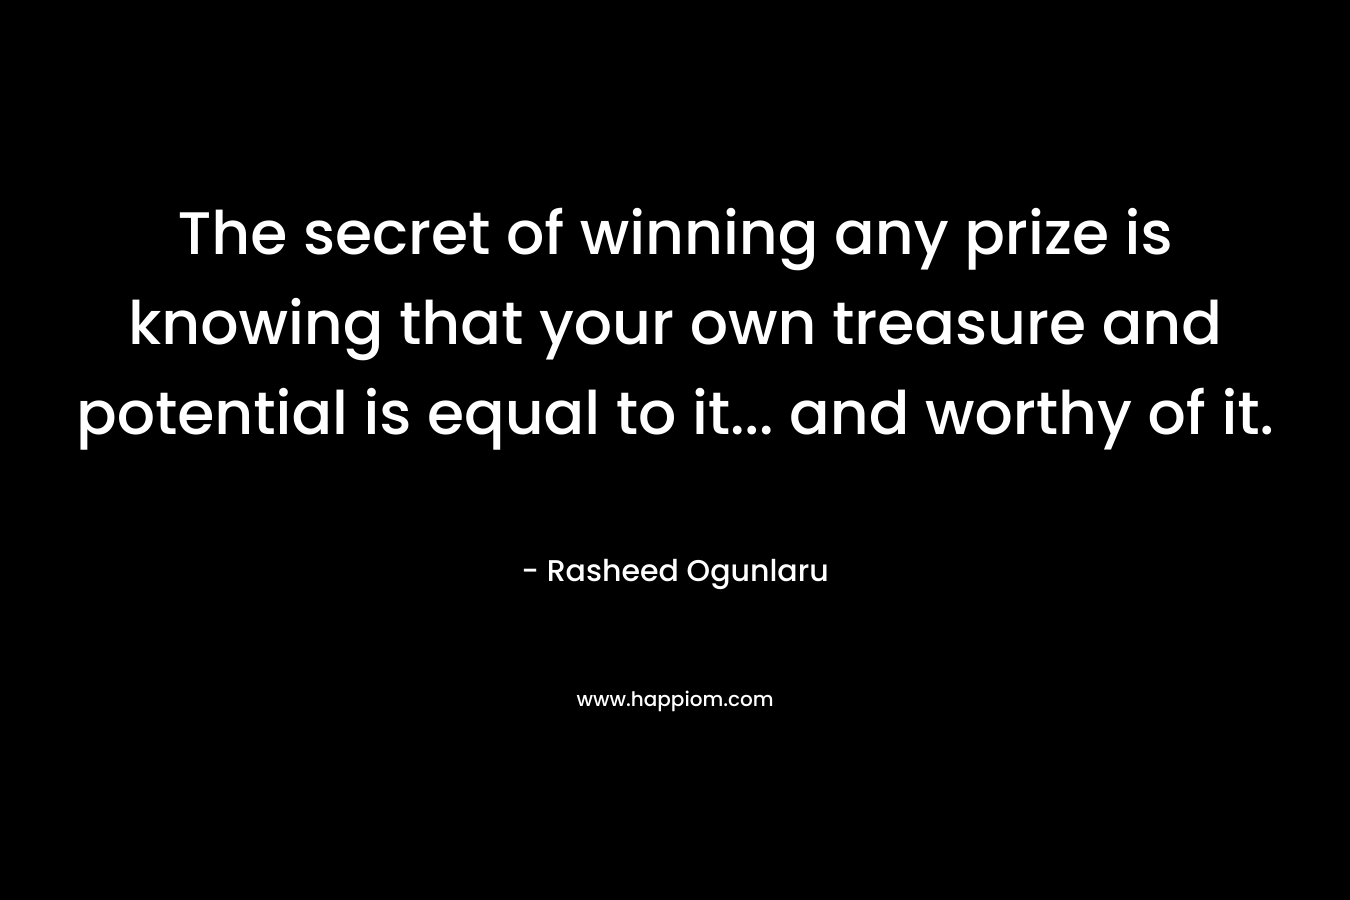 The secret of winning any prize is knowing that your own treasure and potential is equal to it... and worthy of it.